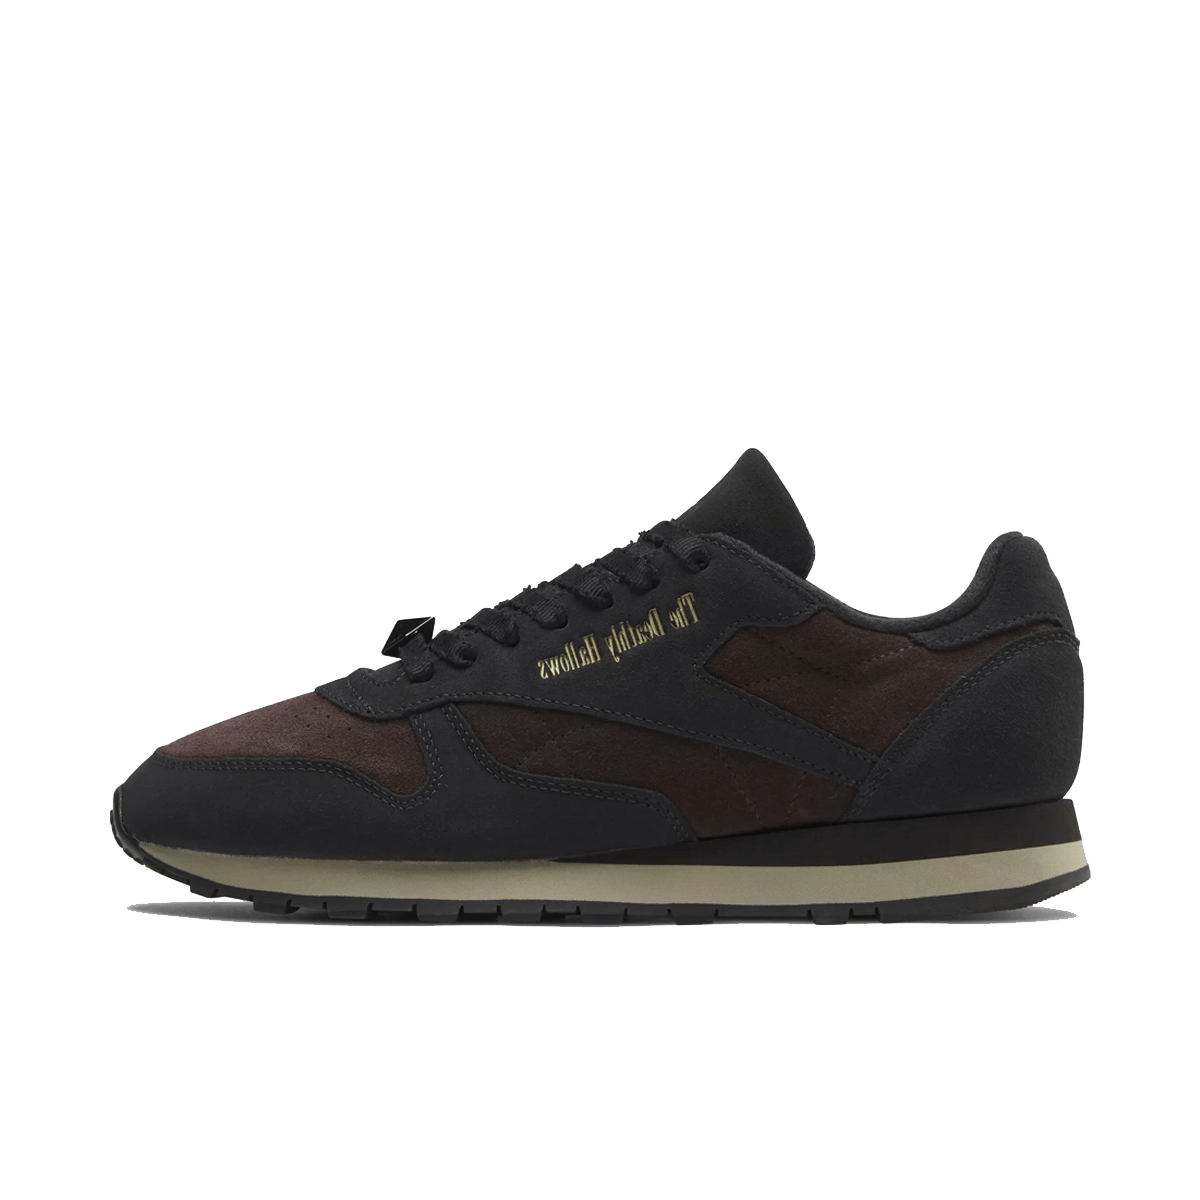 Harry Potter x Reebok Classic Leather 'The Deathly Hallows' 100201817